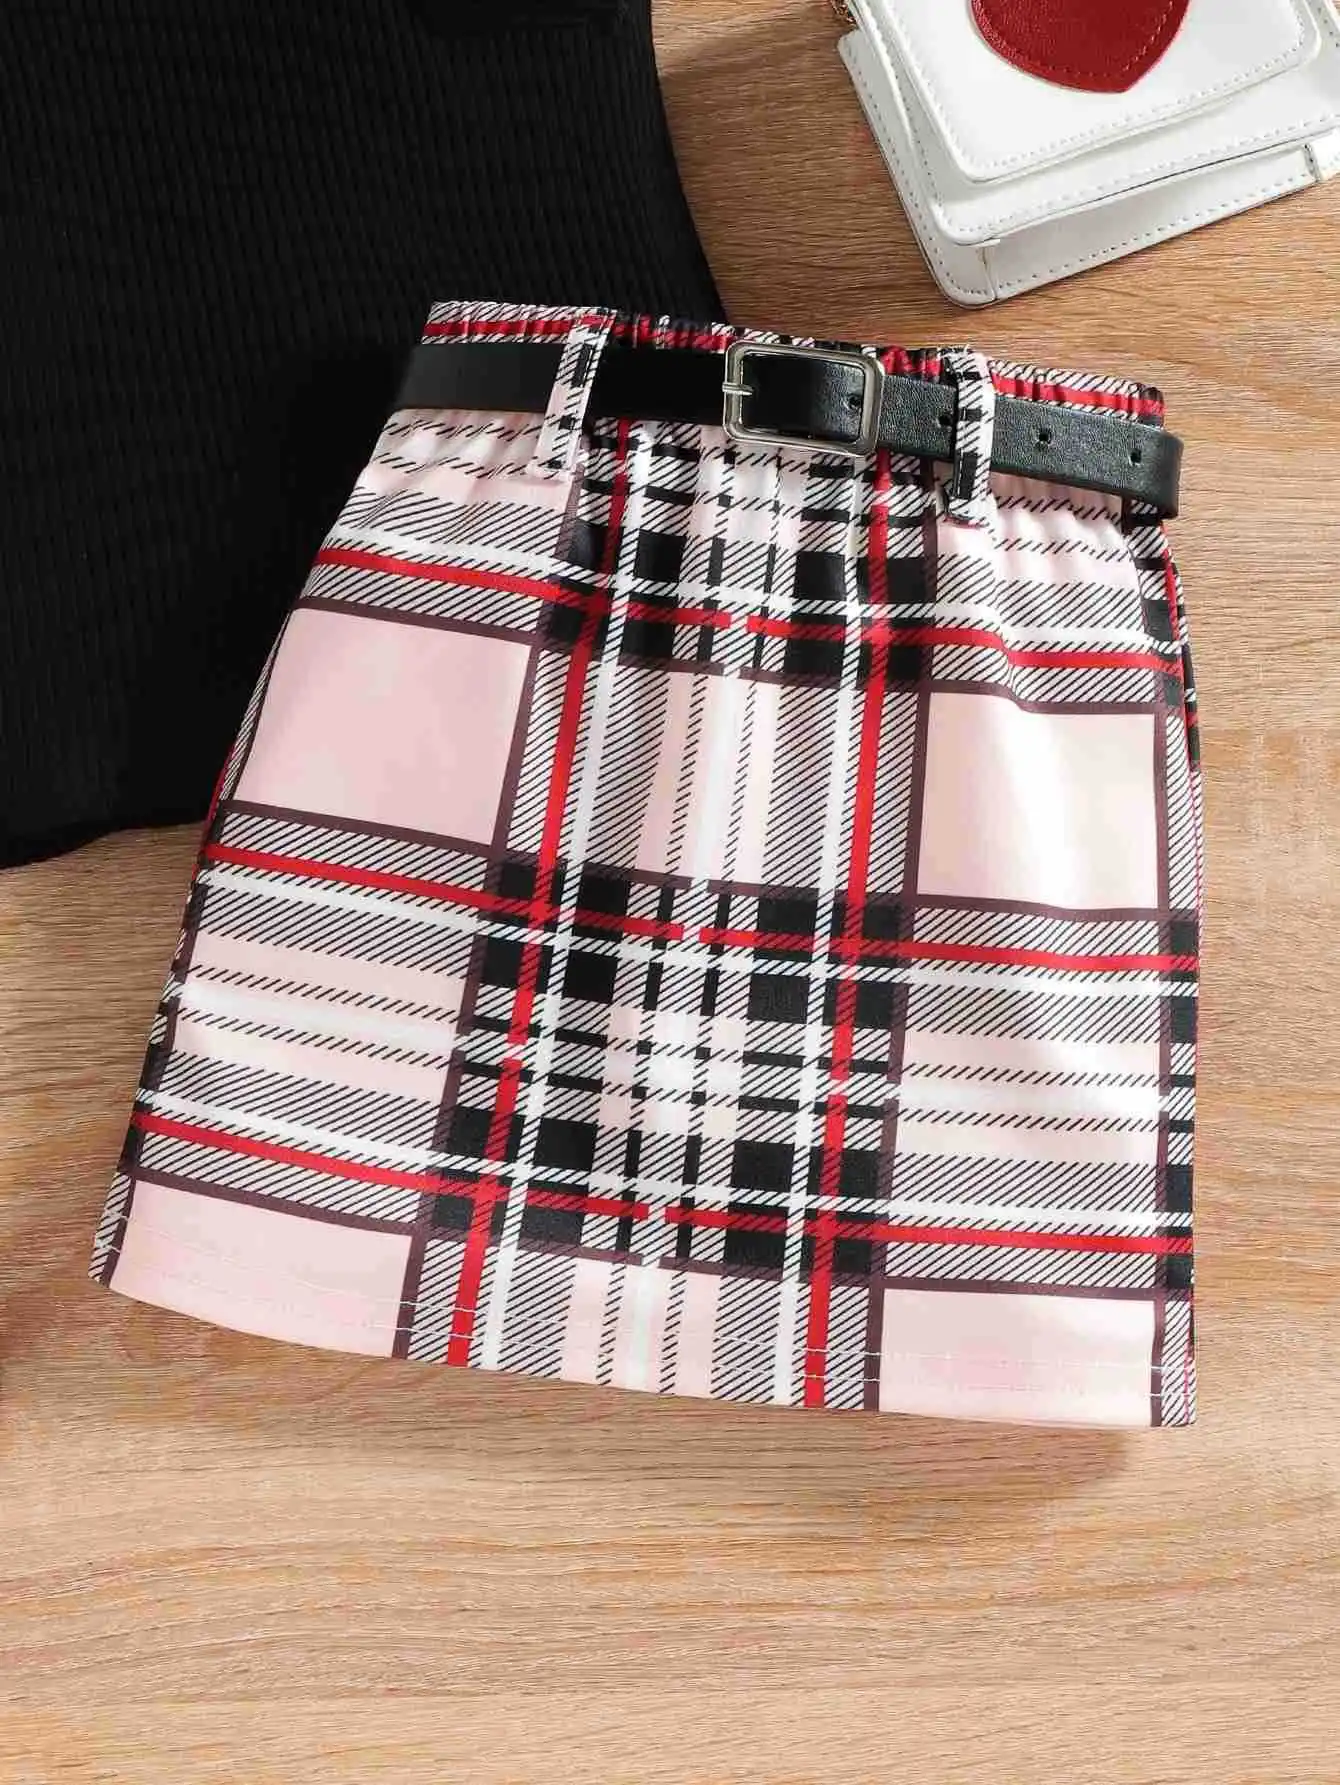 INS Korean children's summer clothes sleeveless shirts tops+plaid skirts boutique toddler girls clothing sets